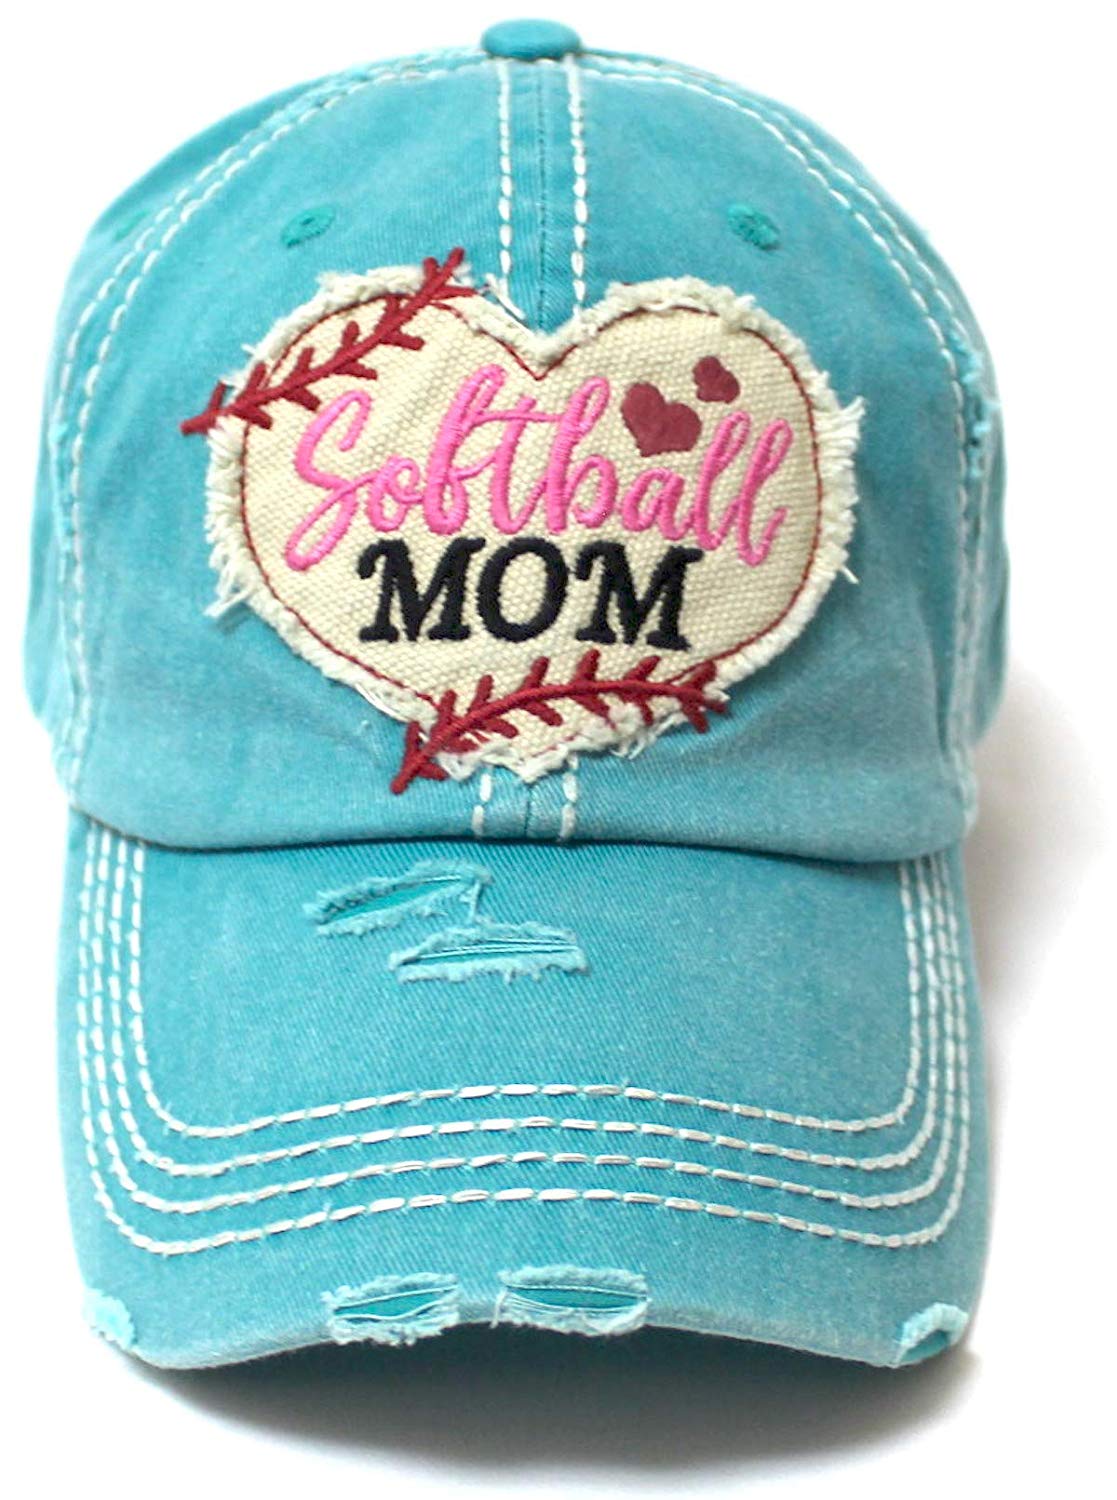 Women's Softball Mom Baseball Cap Heart Softball Patch Embroidery, Turquoise - Caps 'N Vintage 